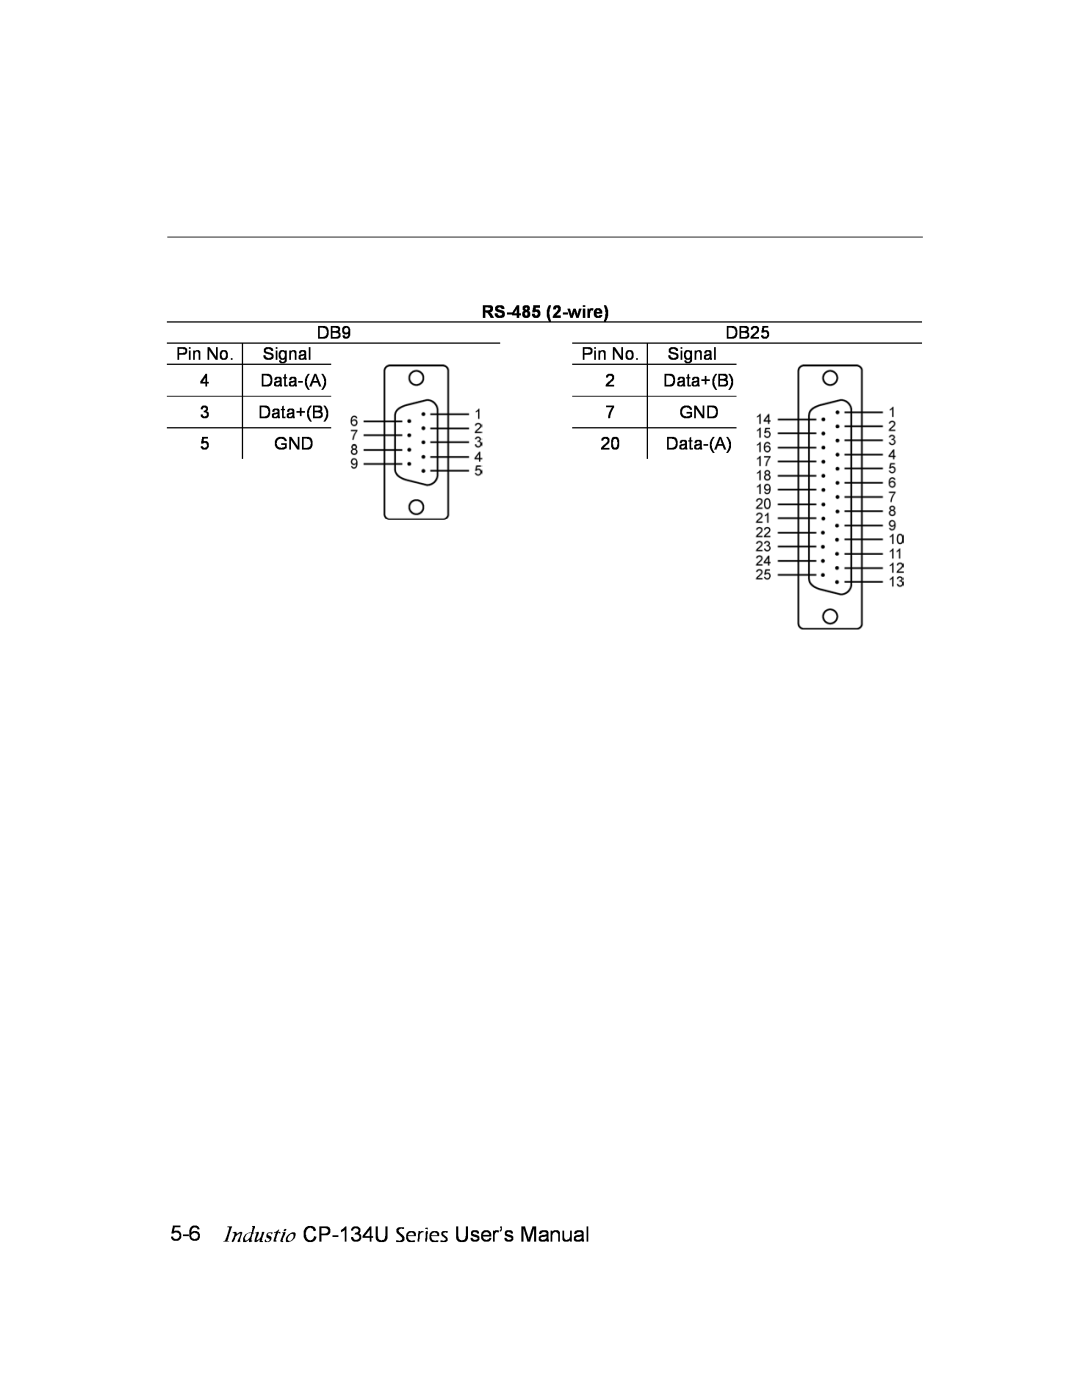 Moxa Technologies user manual Industio CP-134U Series User’s Manual, RS-485 2-wire 